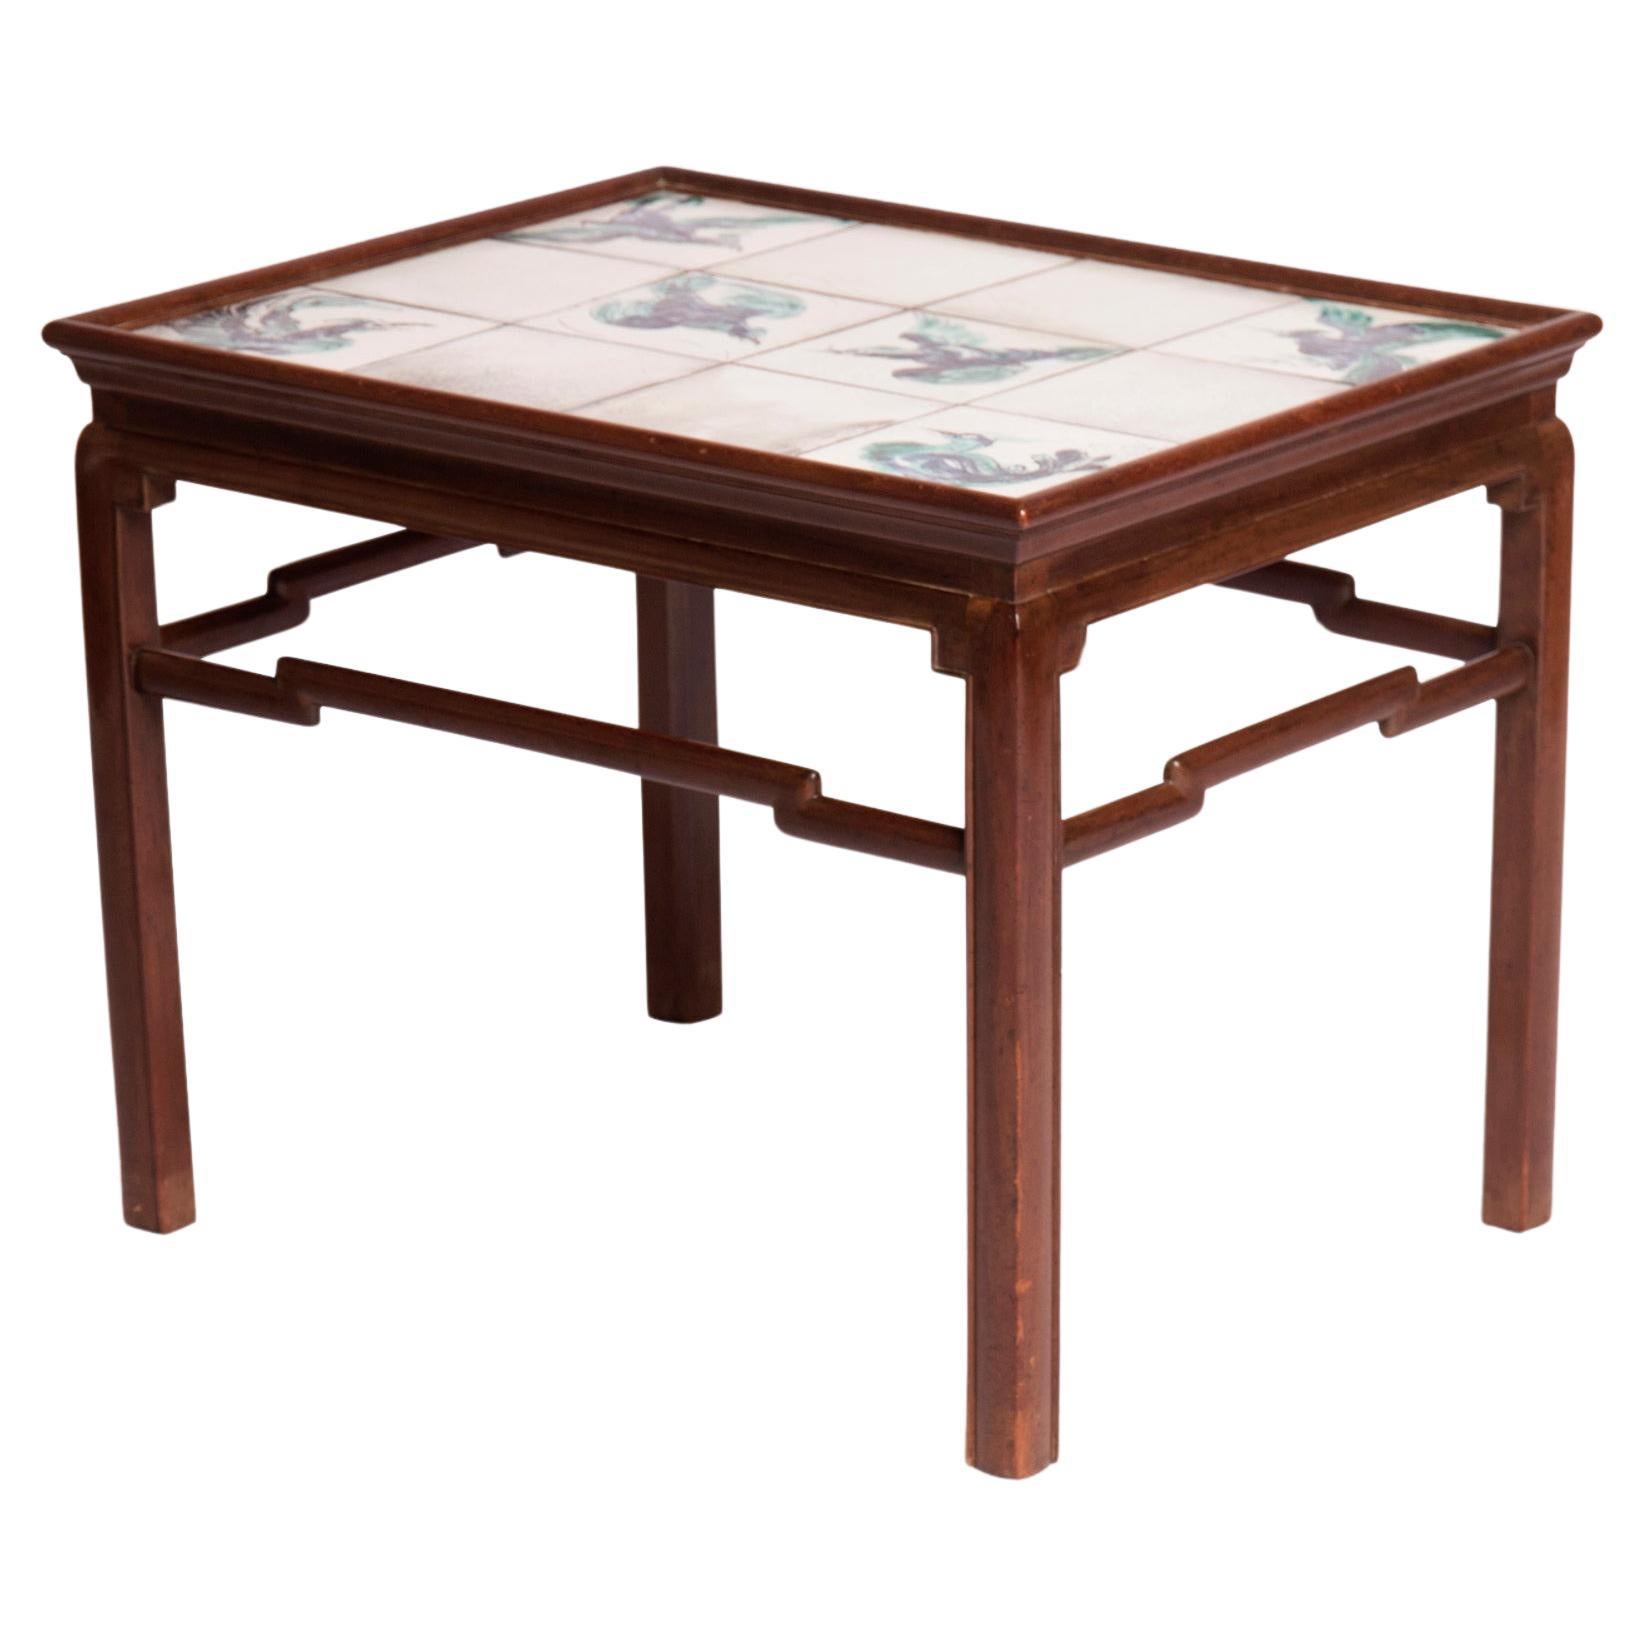 Chinese inspired mahogany coffee table with tiles in white, green, blue nuances